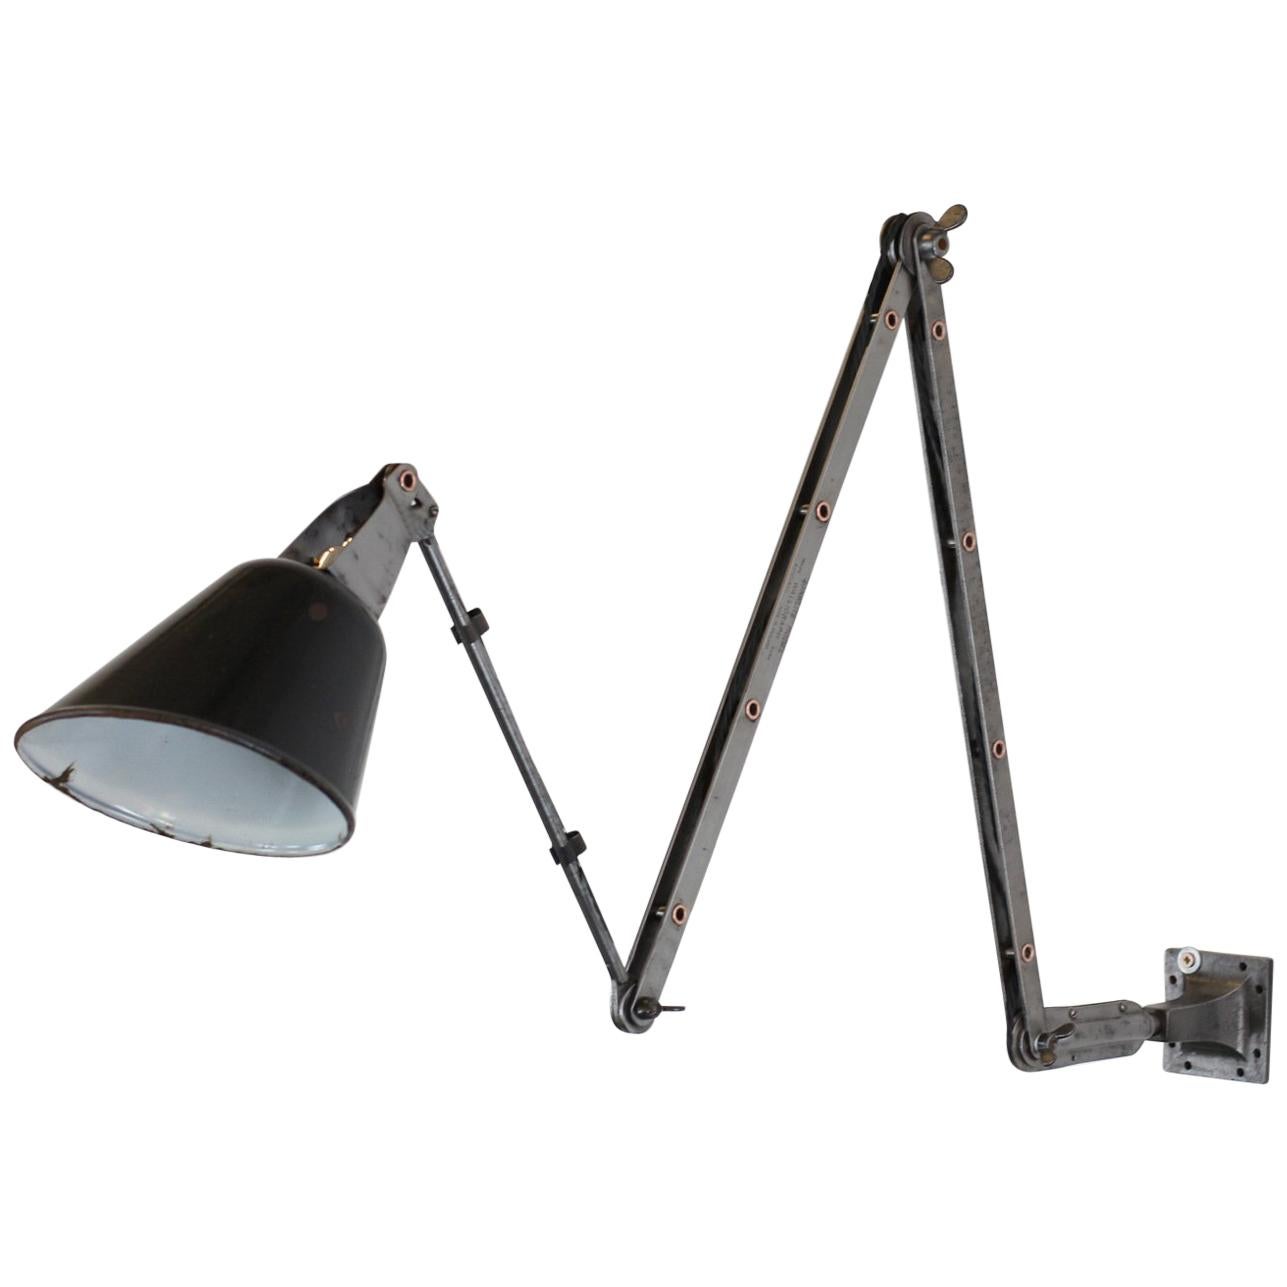 Wall-Mounted Industrial Lamp by Walligraph, circa 1930s